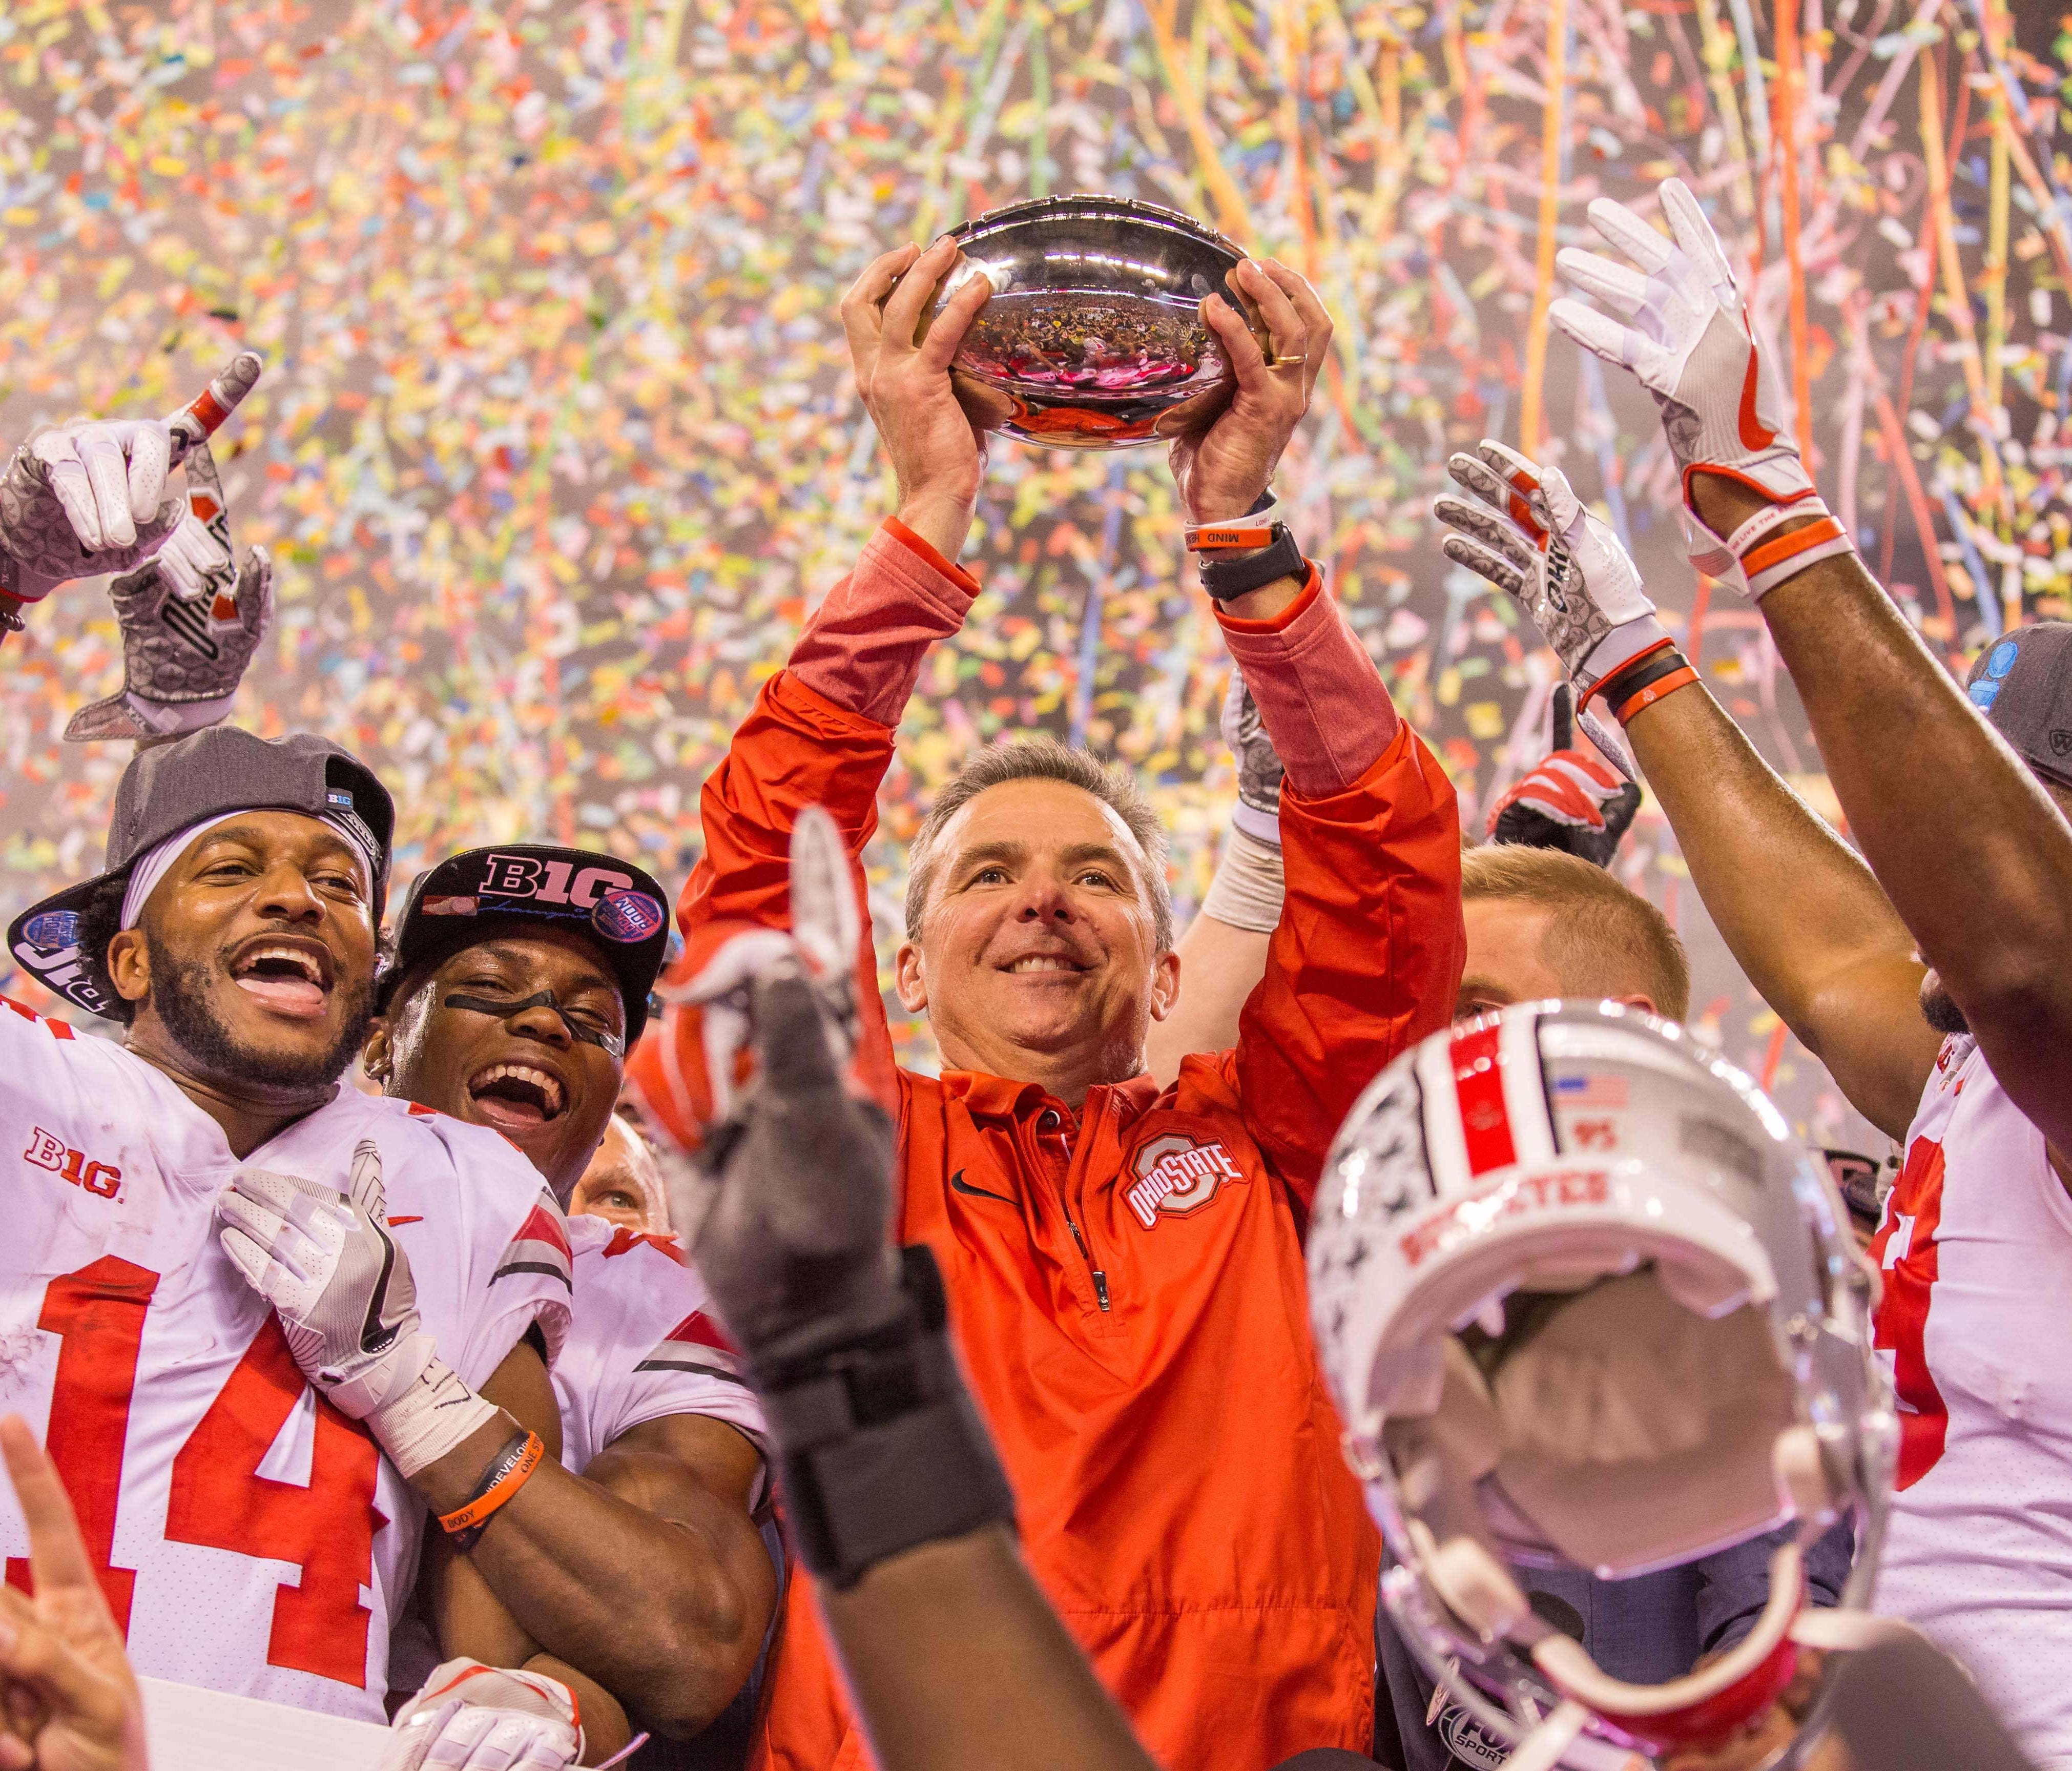 Ohio State Buckeyes head coach Urban Meyer holds up the championship trophy with wide receiver K.J. Hill (14) and his players after the game against the Wisconsin Badgers in the Big Ten championship game at Lucas Oil Stadium.